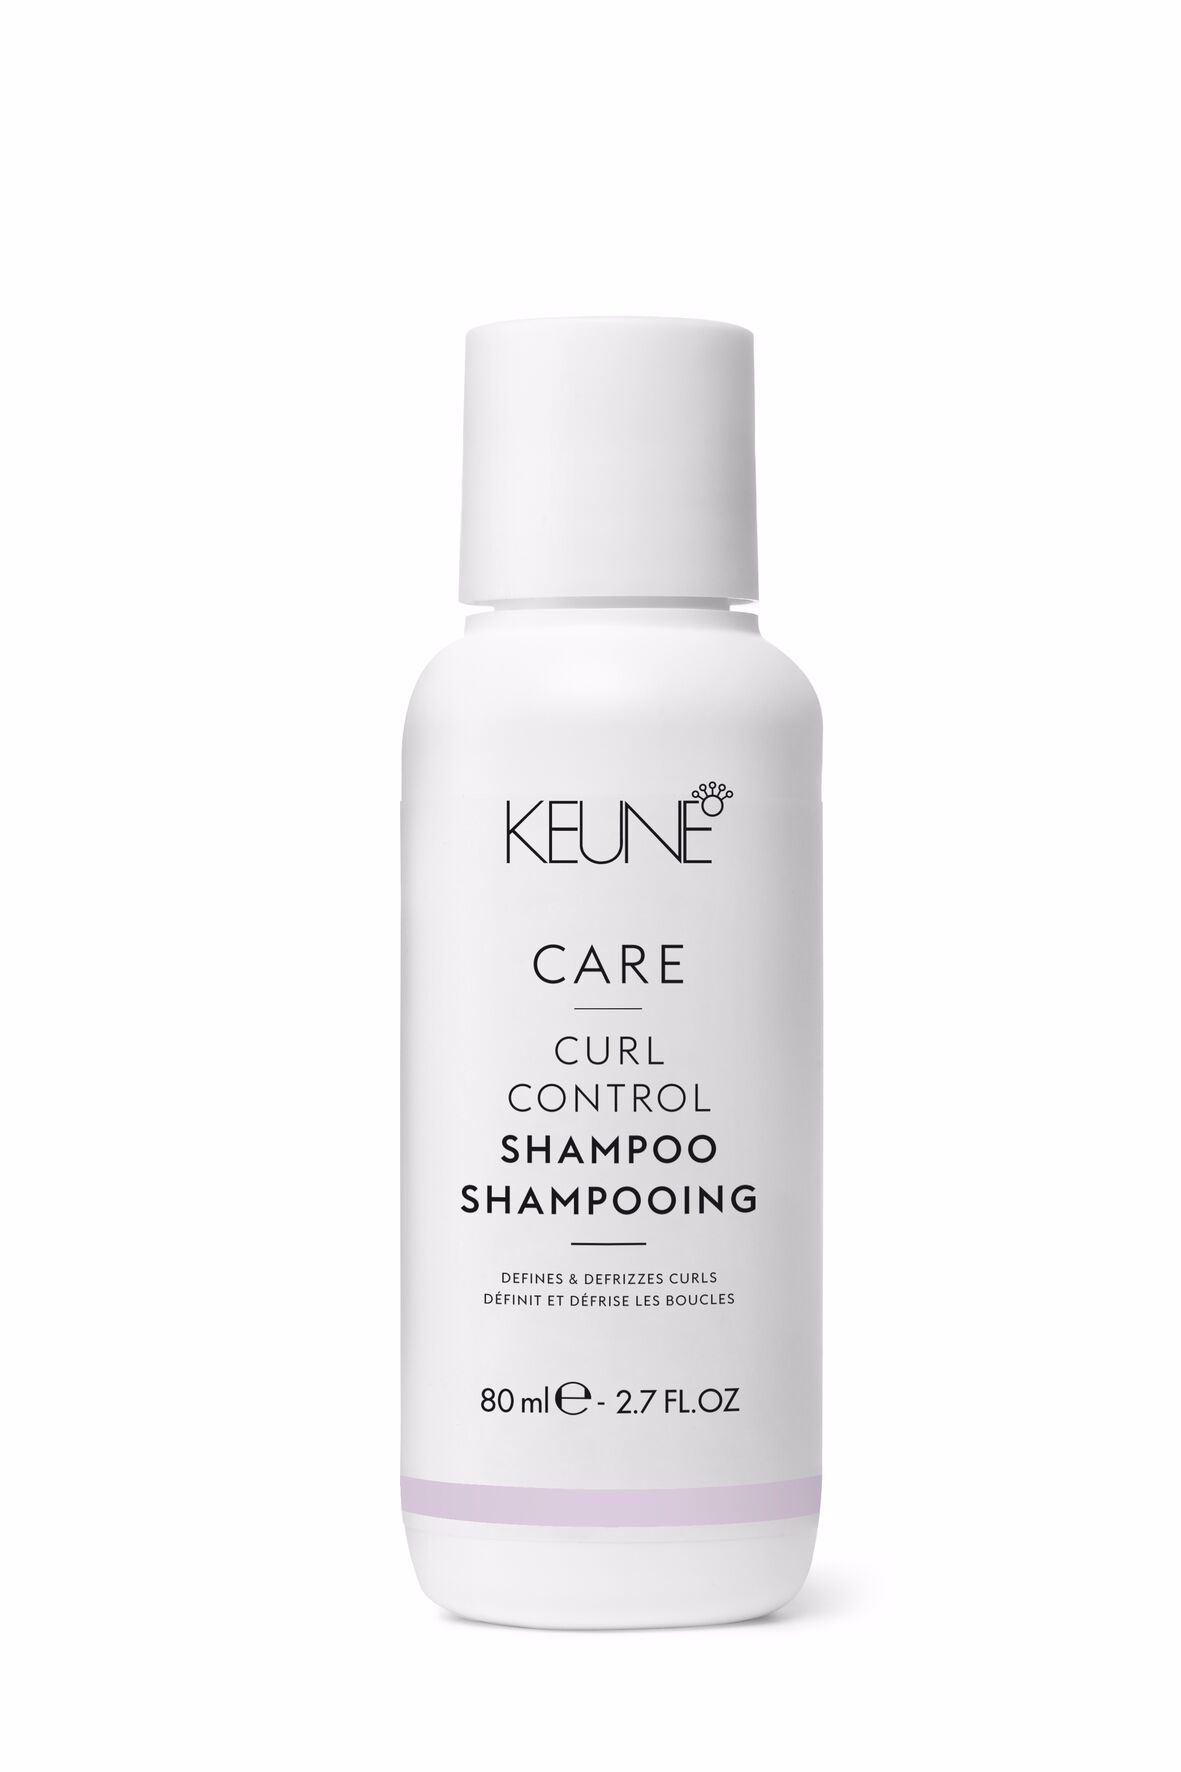 CARE Curl Control Shampoo - Explore the best shampoo for curly hair. Specially developed for curl hair. Order top curly hair products now on keune.ch!